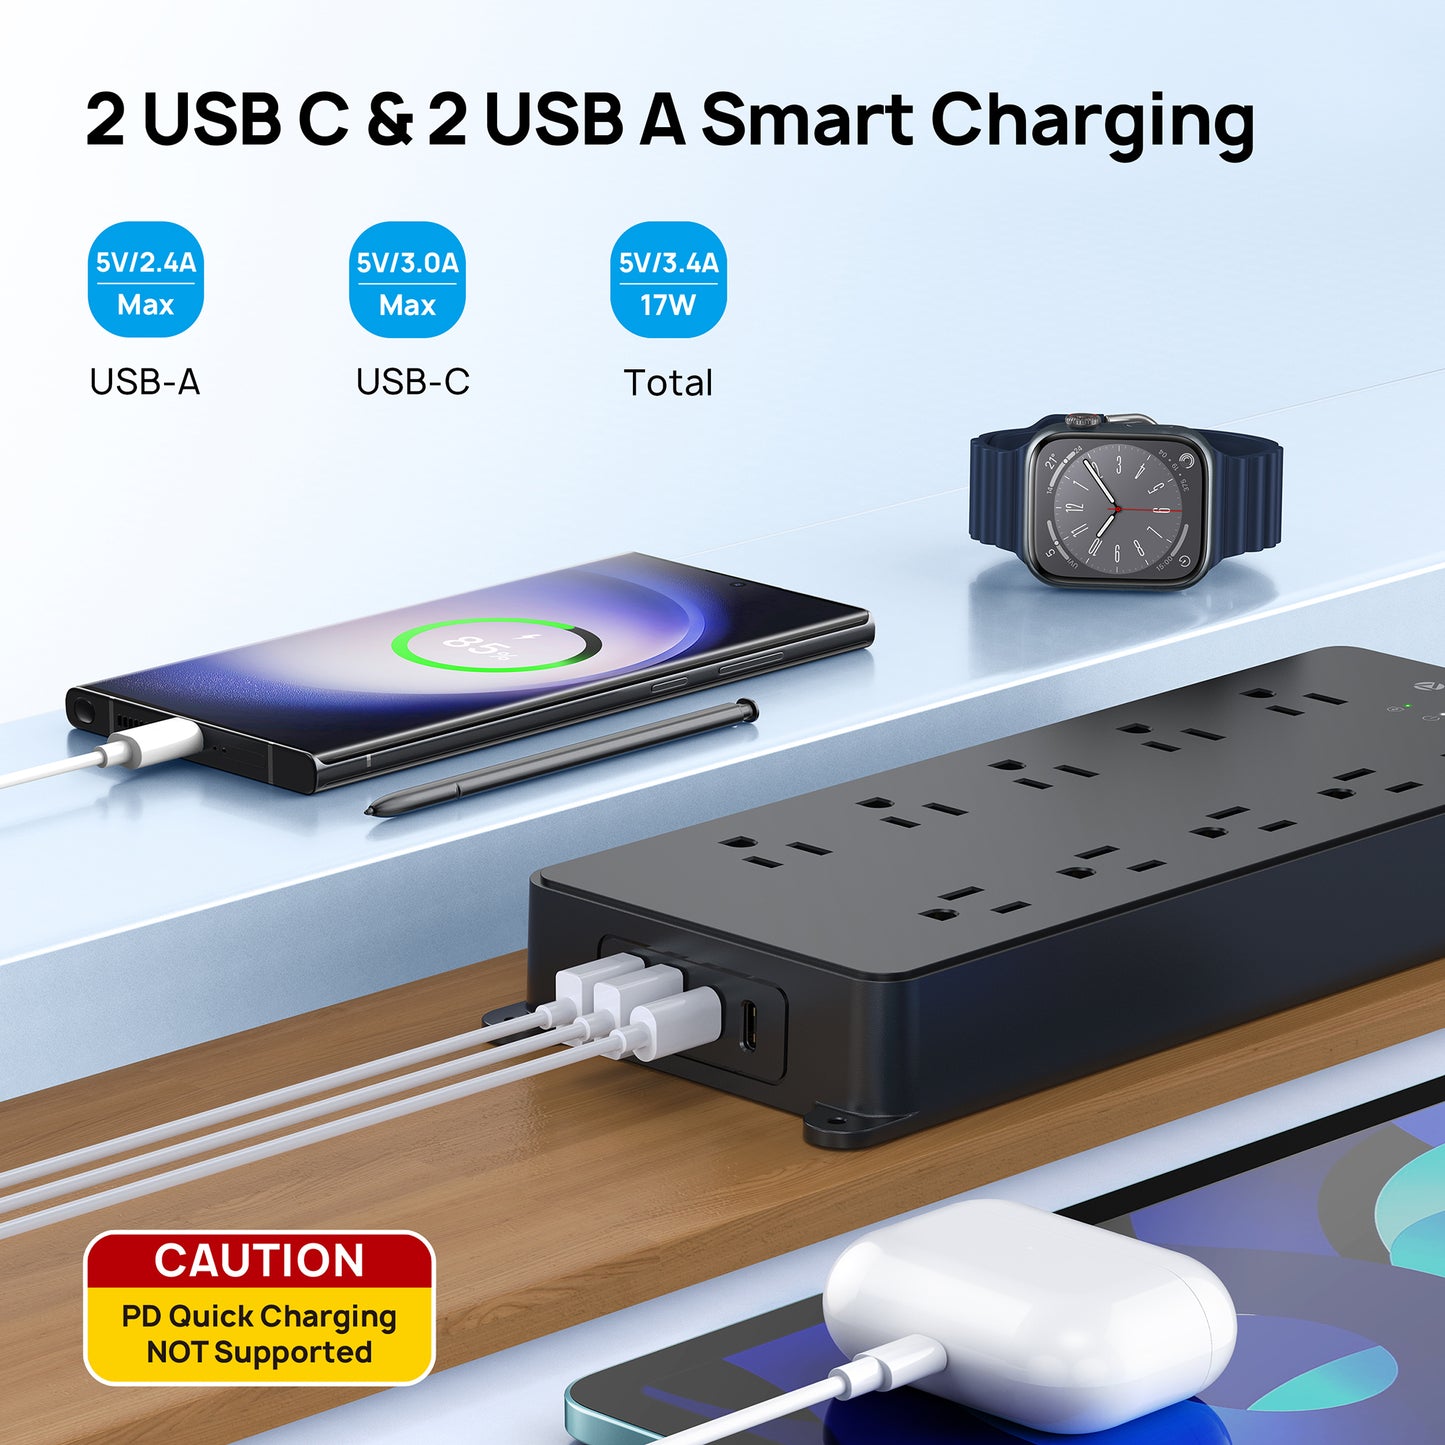 Power Strip Surge Protector, TROND 10 Widely Spaced Outlets with 4 USB Ports